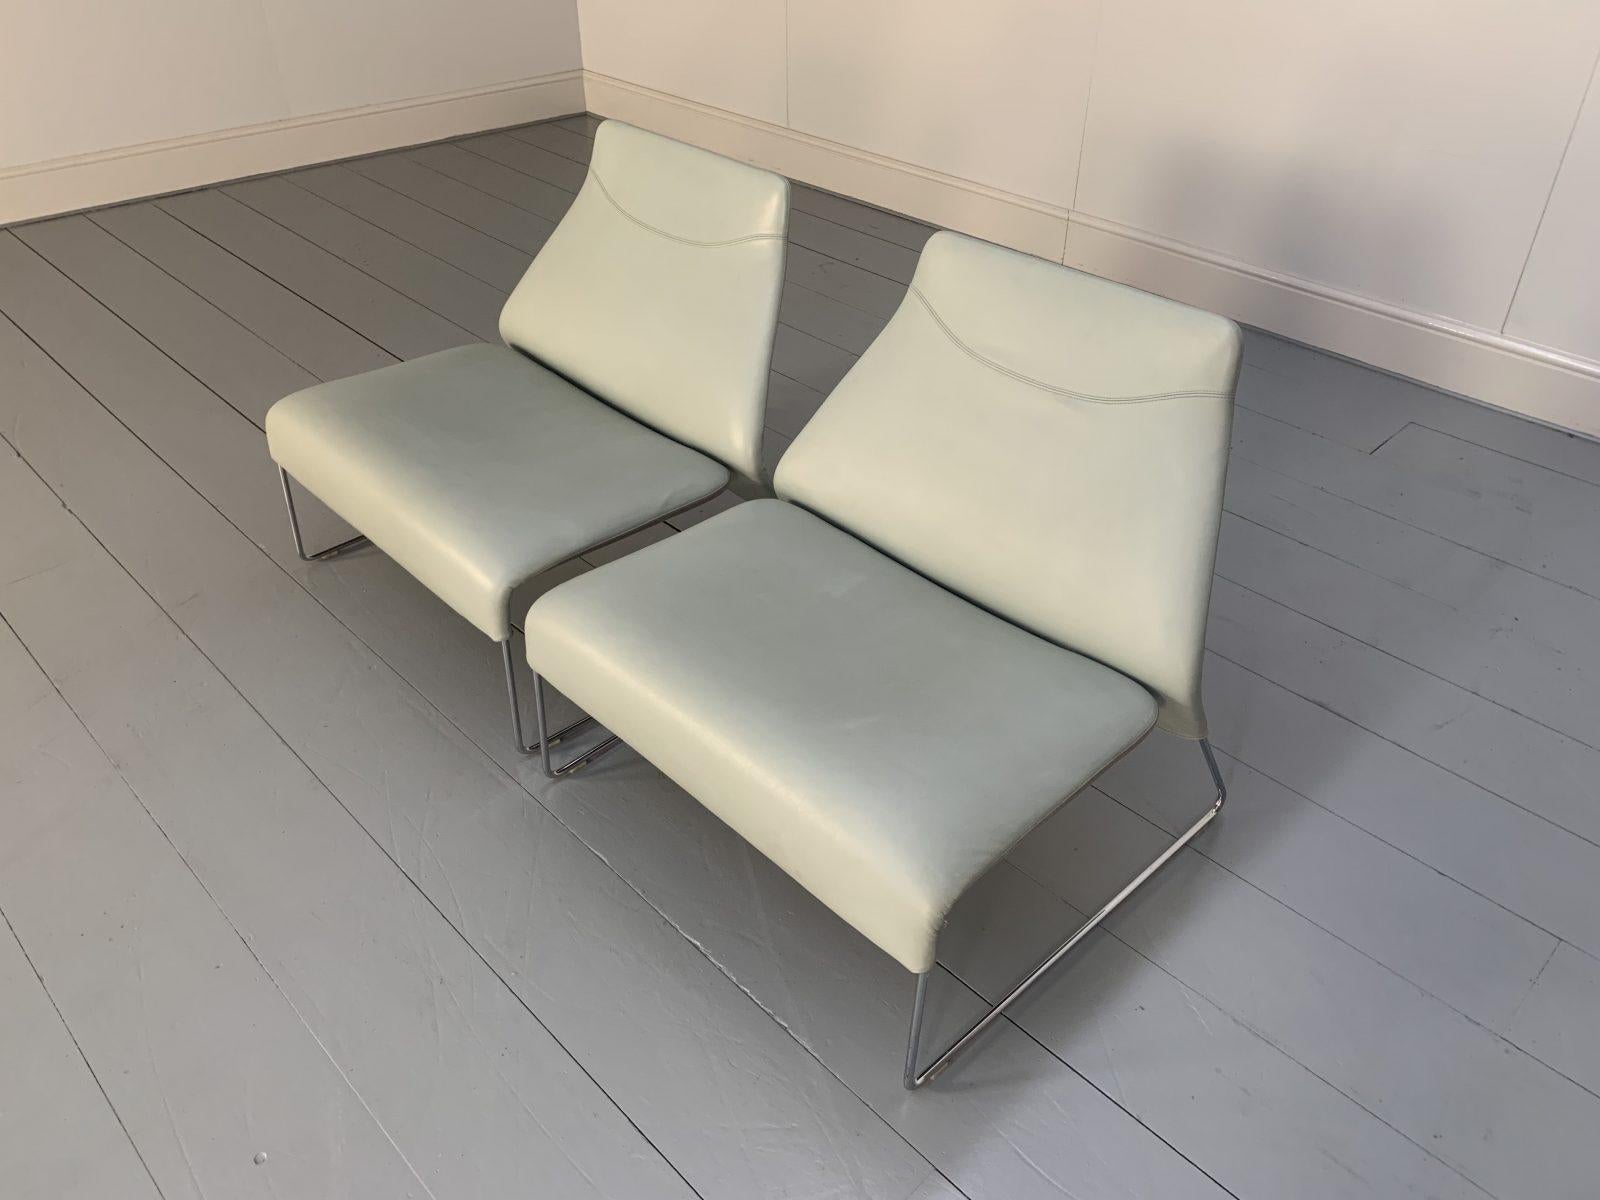 Pair of B&B Italia “Lazy “05” Armchairs in Pale Grey Blue “Gamma” Leather In Good Condition For Sale In Barrowford, GB